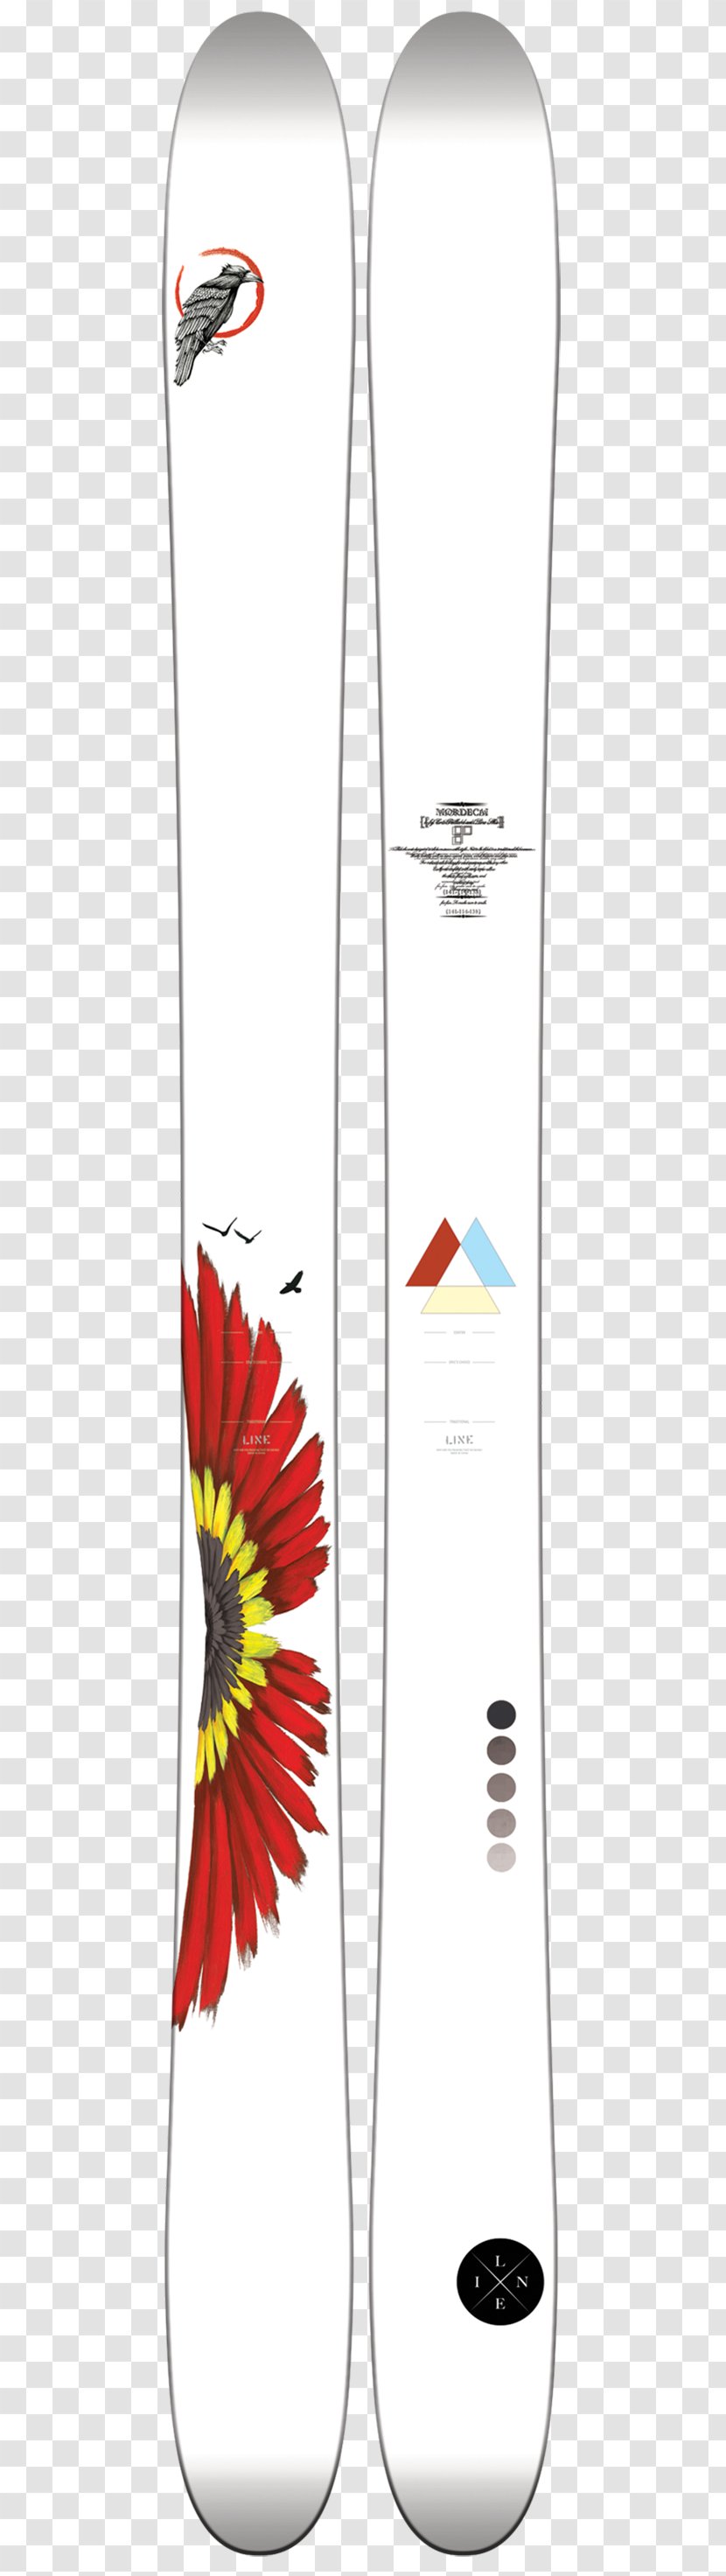 Fall Line Skis Skiing Sporting Goods - Piste Transparent PNG